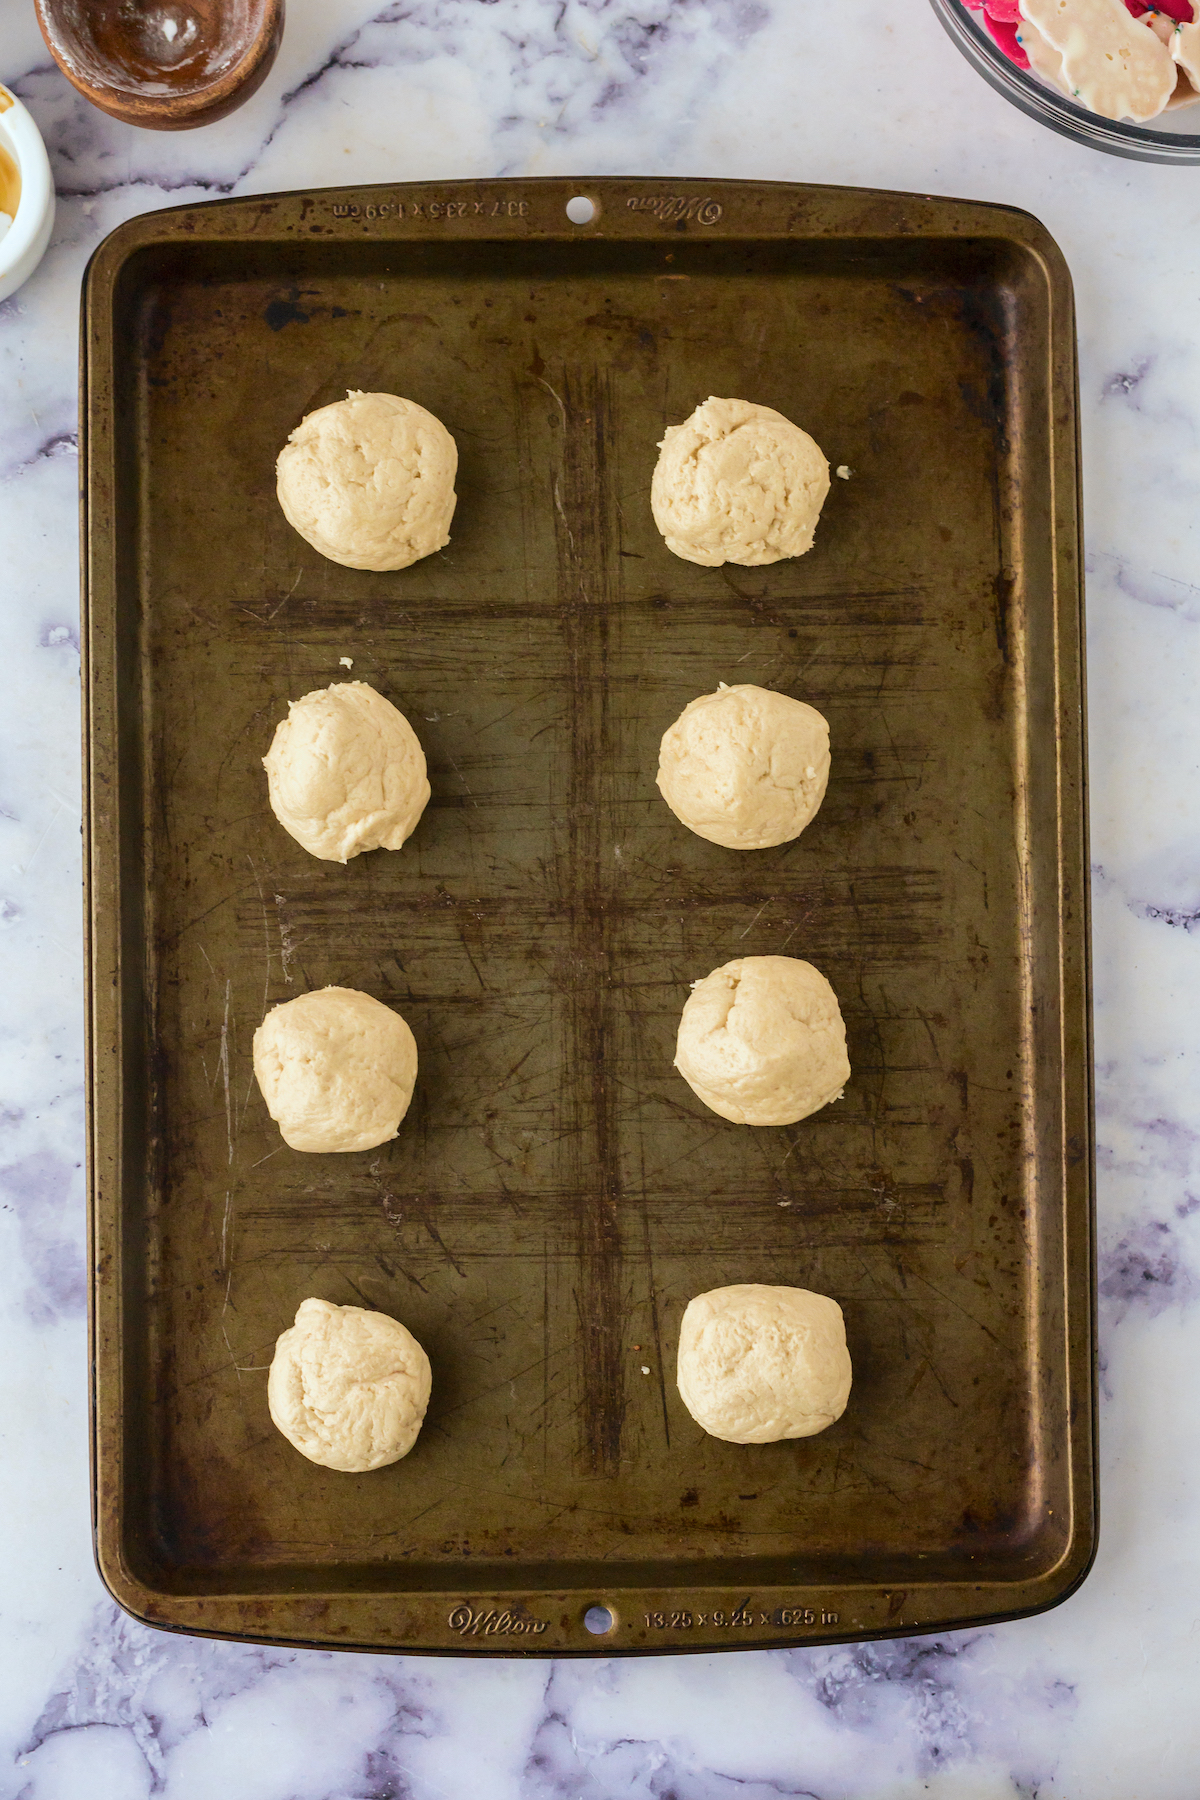 sugar cookie dough placed on the baking sheet